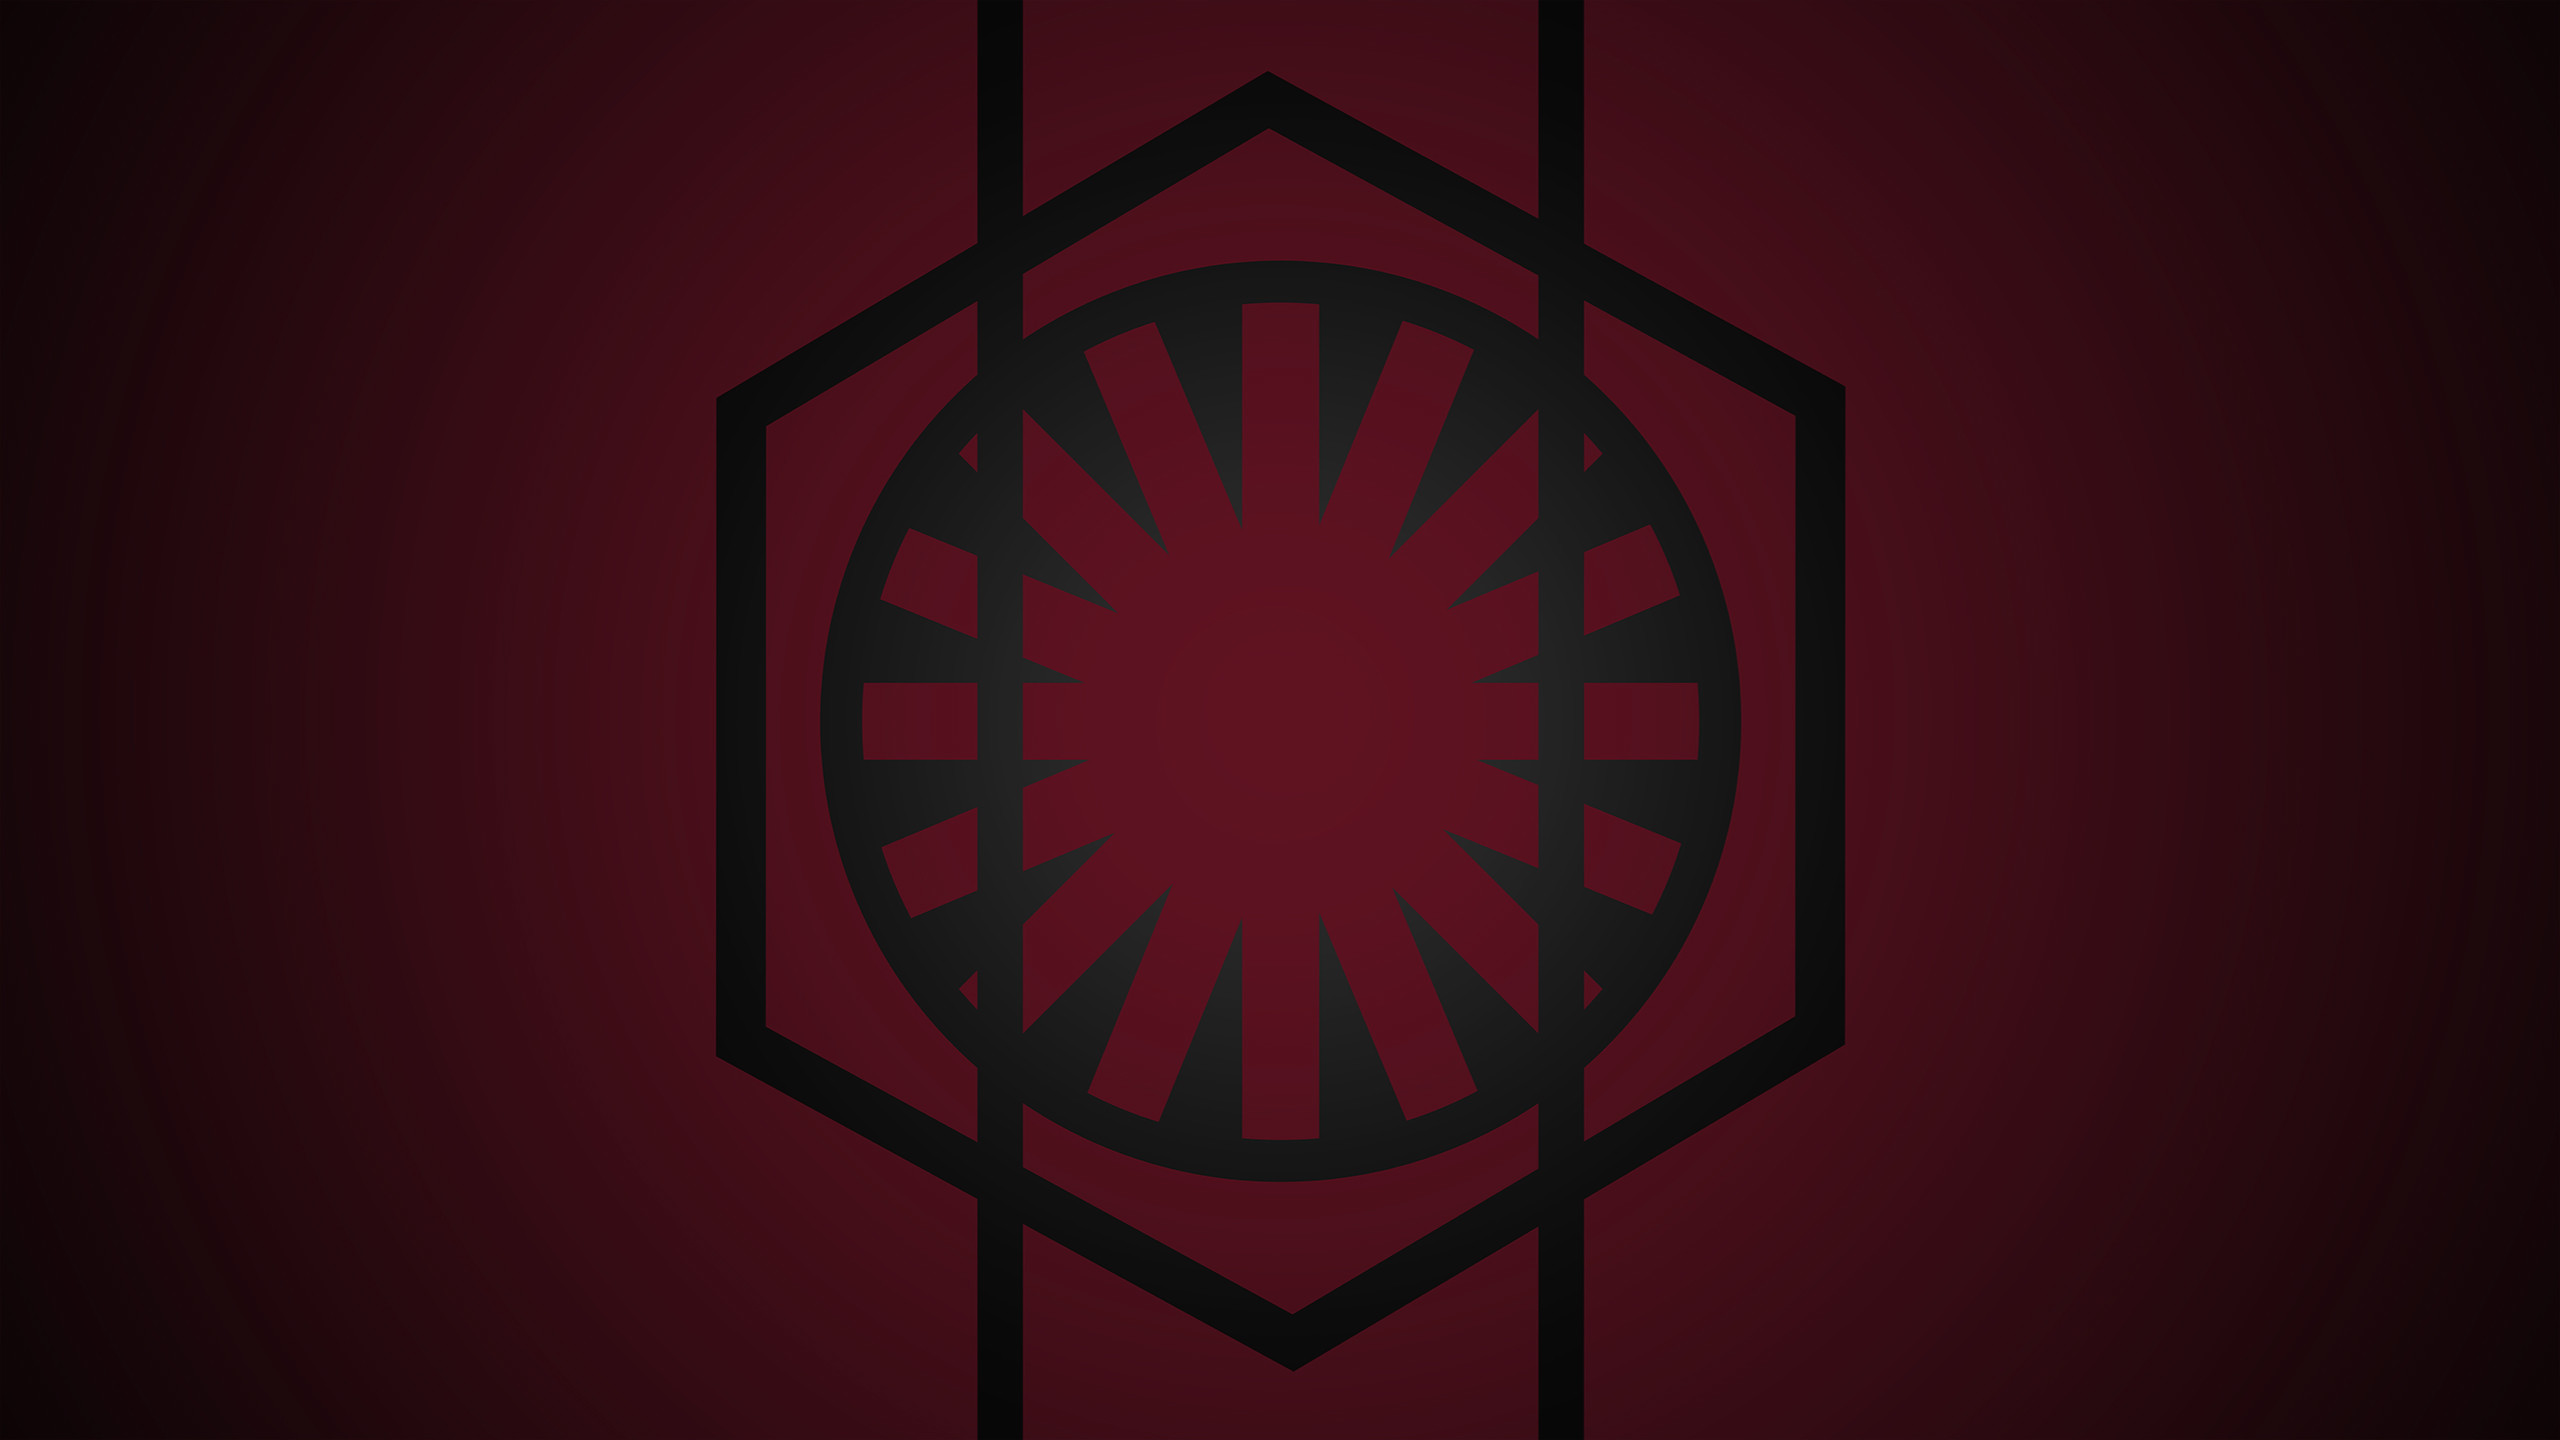 2560x1440 My first attempt at a "new Empire" wallpaper.